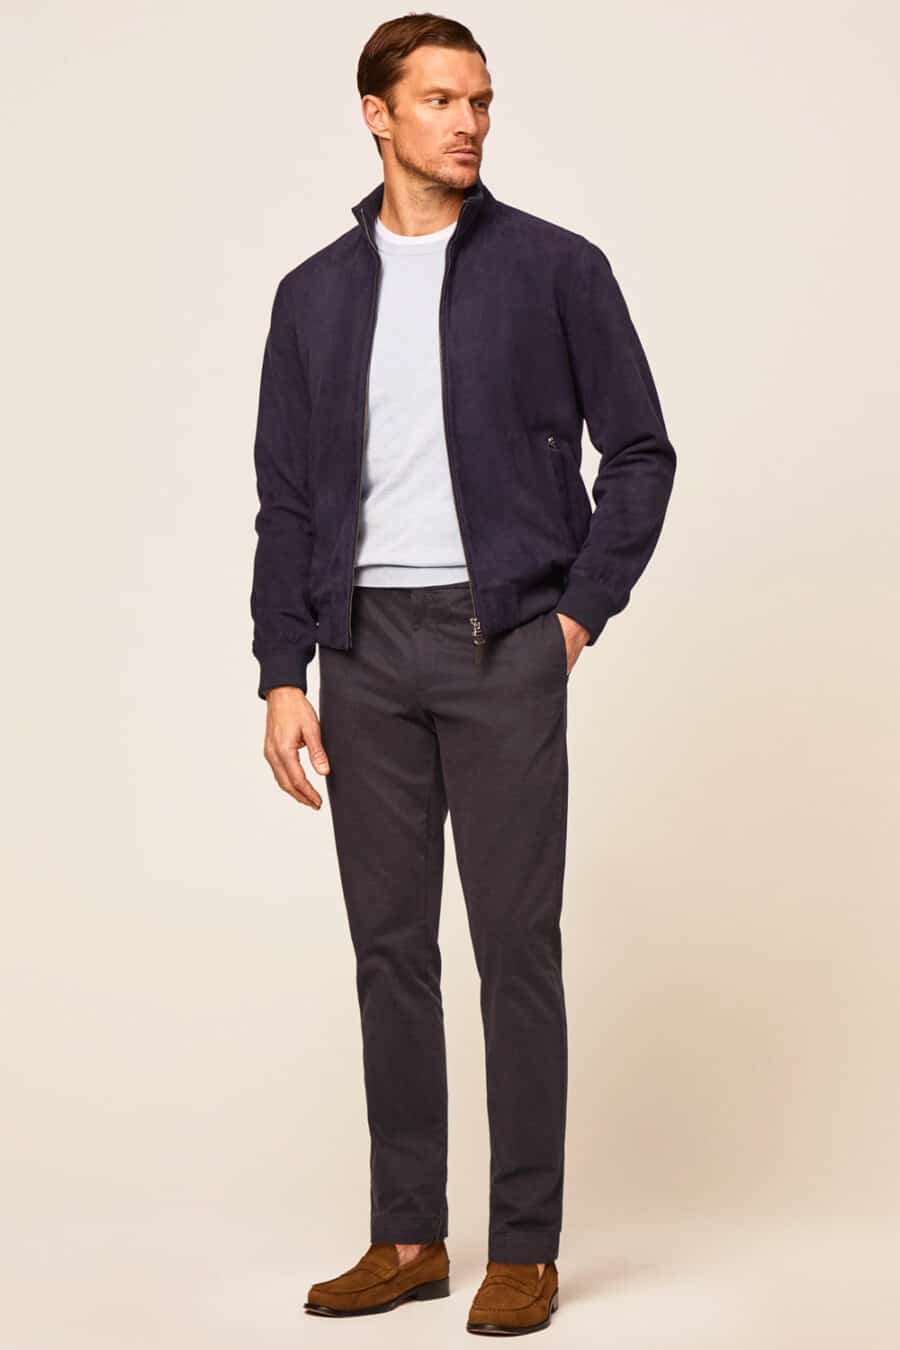 Men's navy chinos, white T-shirt, light grey sweater, navy bomber jacket and brown suede loafers outfit